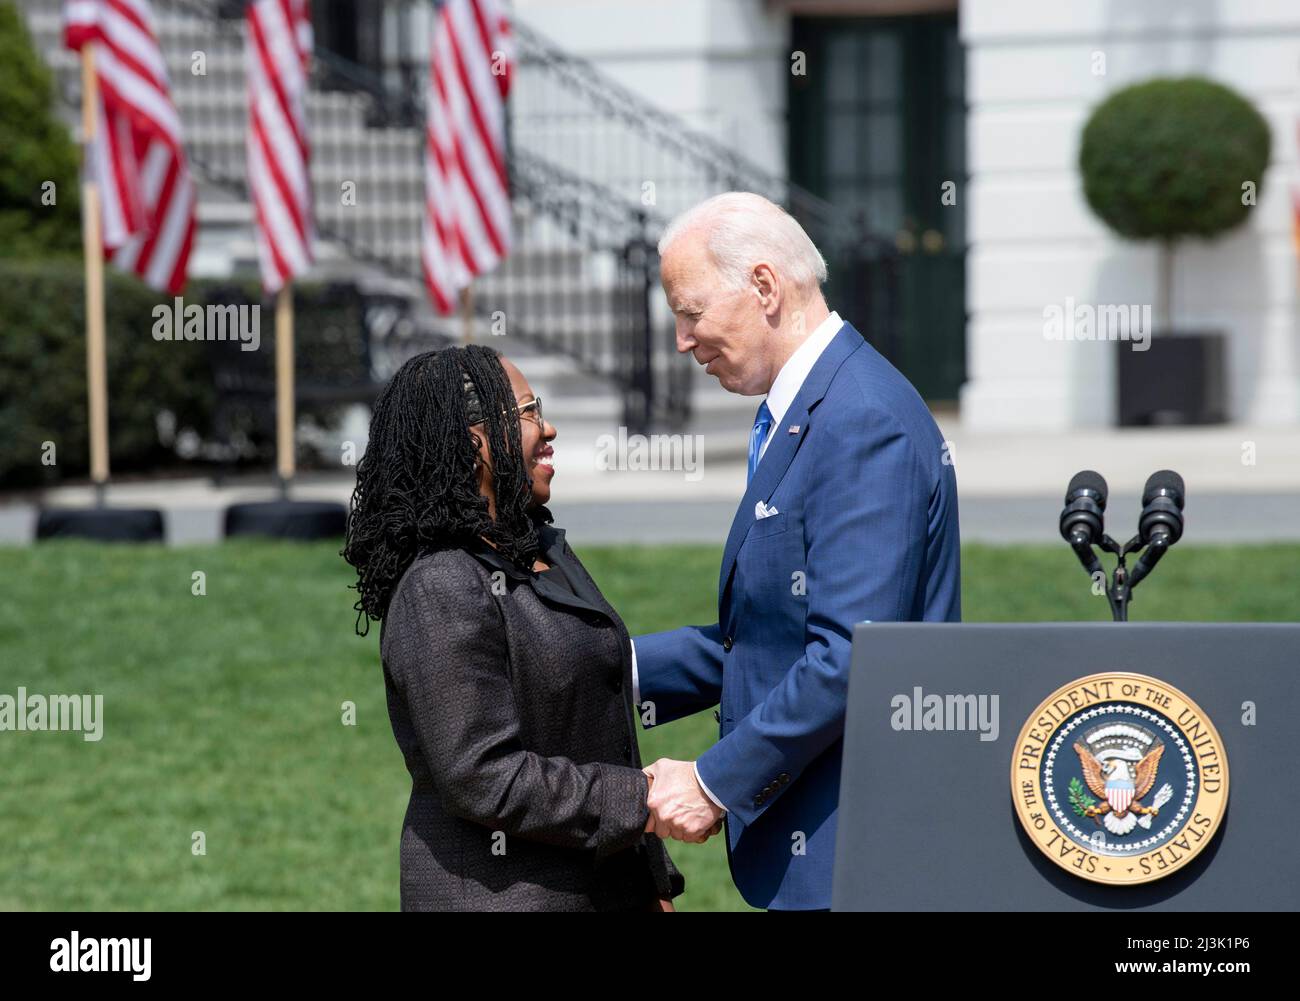 Washington, USA. 8th Apr, 2022. Judge Ketanji Brown Jackson (L) and U.S. President Joe Biden attend an event marking the Senate confirmation of Jackson for the Supreme Court at the South Lawn of the White House in Washington, DC, the United States, on April 8, 2022. The White House held the event Friday afternoon to mark the Senate confirmation of the first African American woman for the Supreme Court. Credit: Liu Jie/Xinhua/Alamy Live News Stock Photo